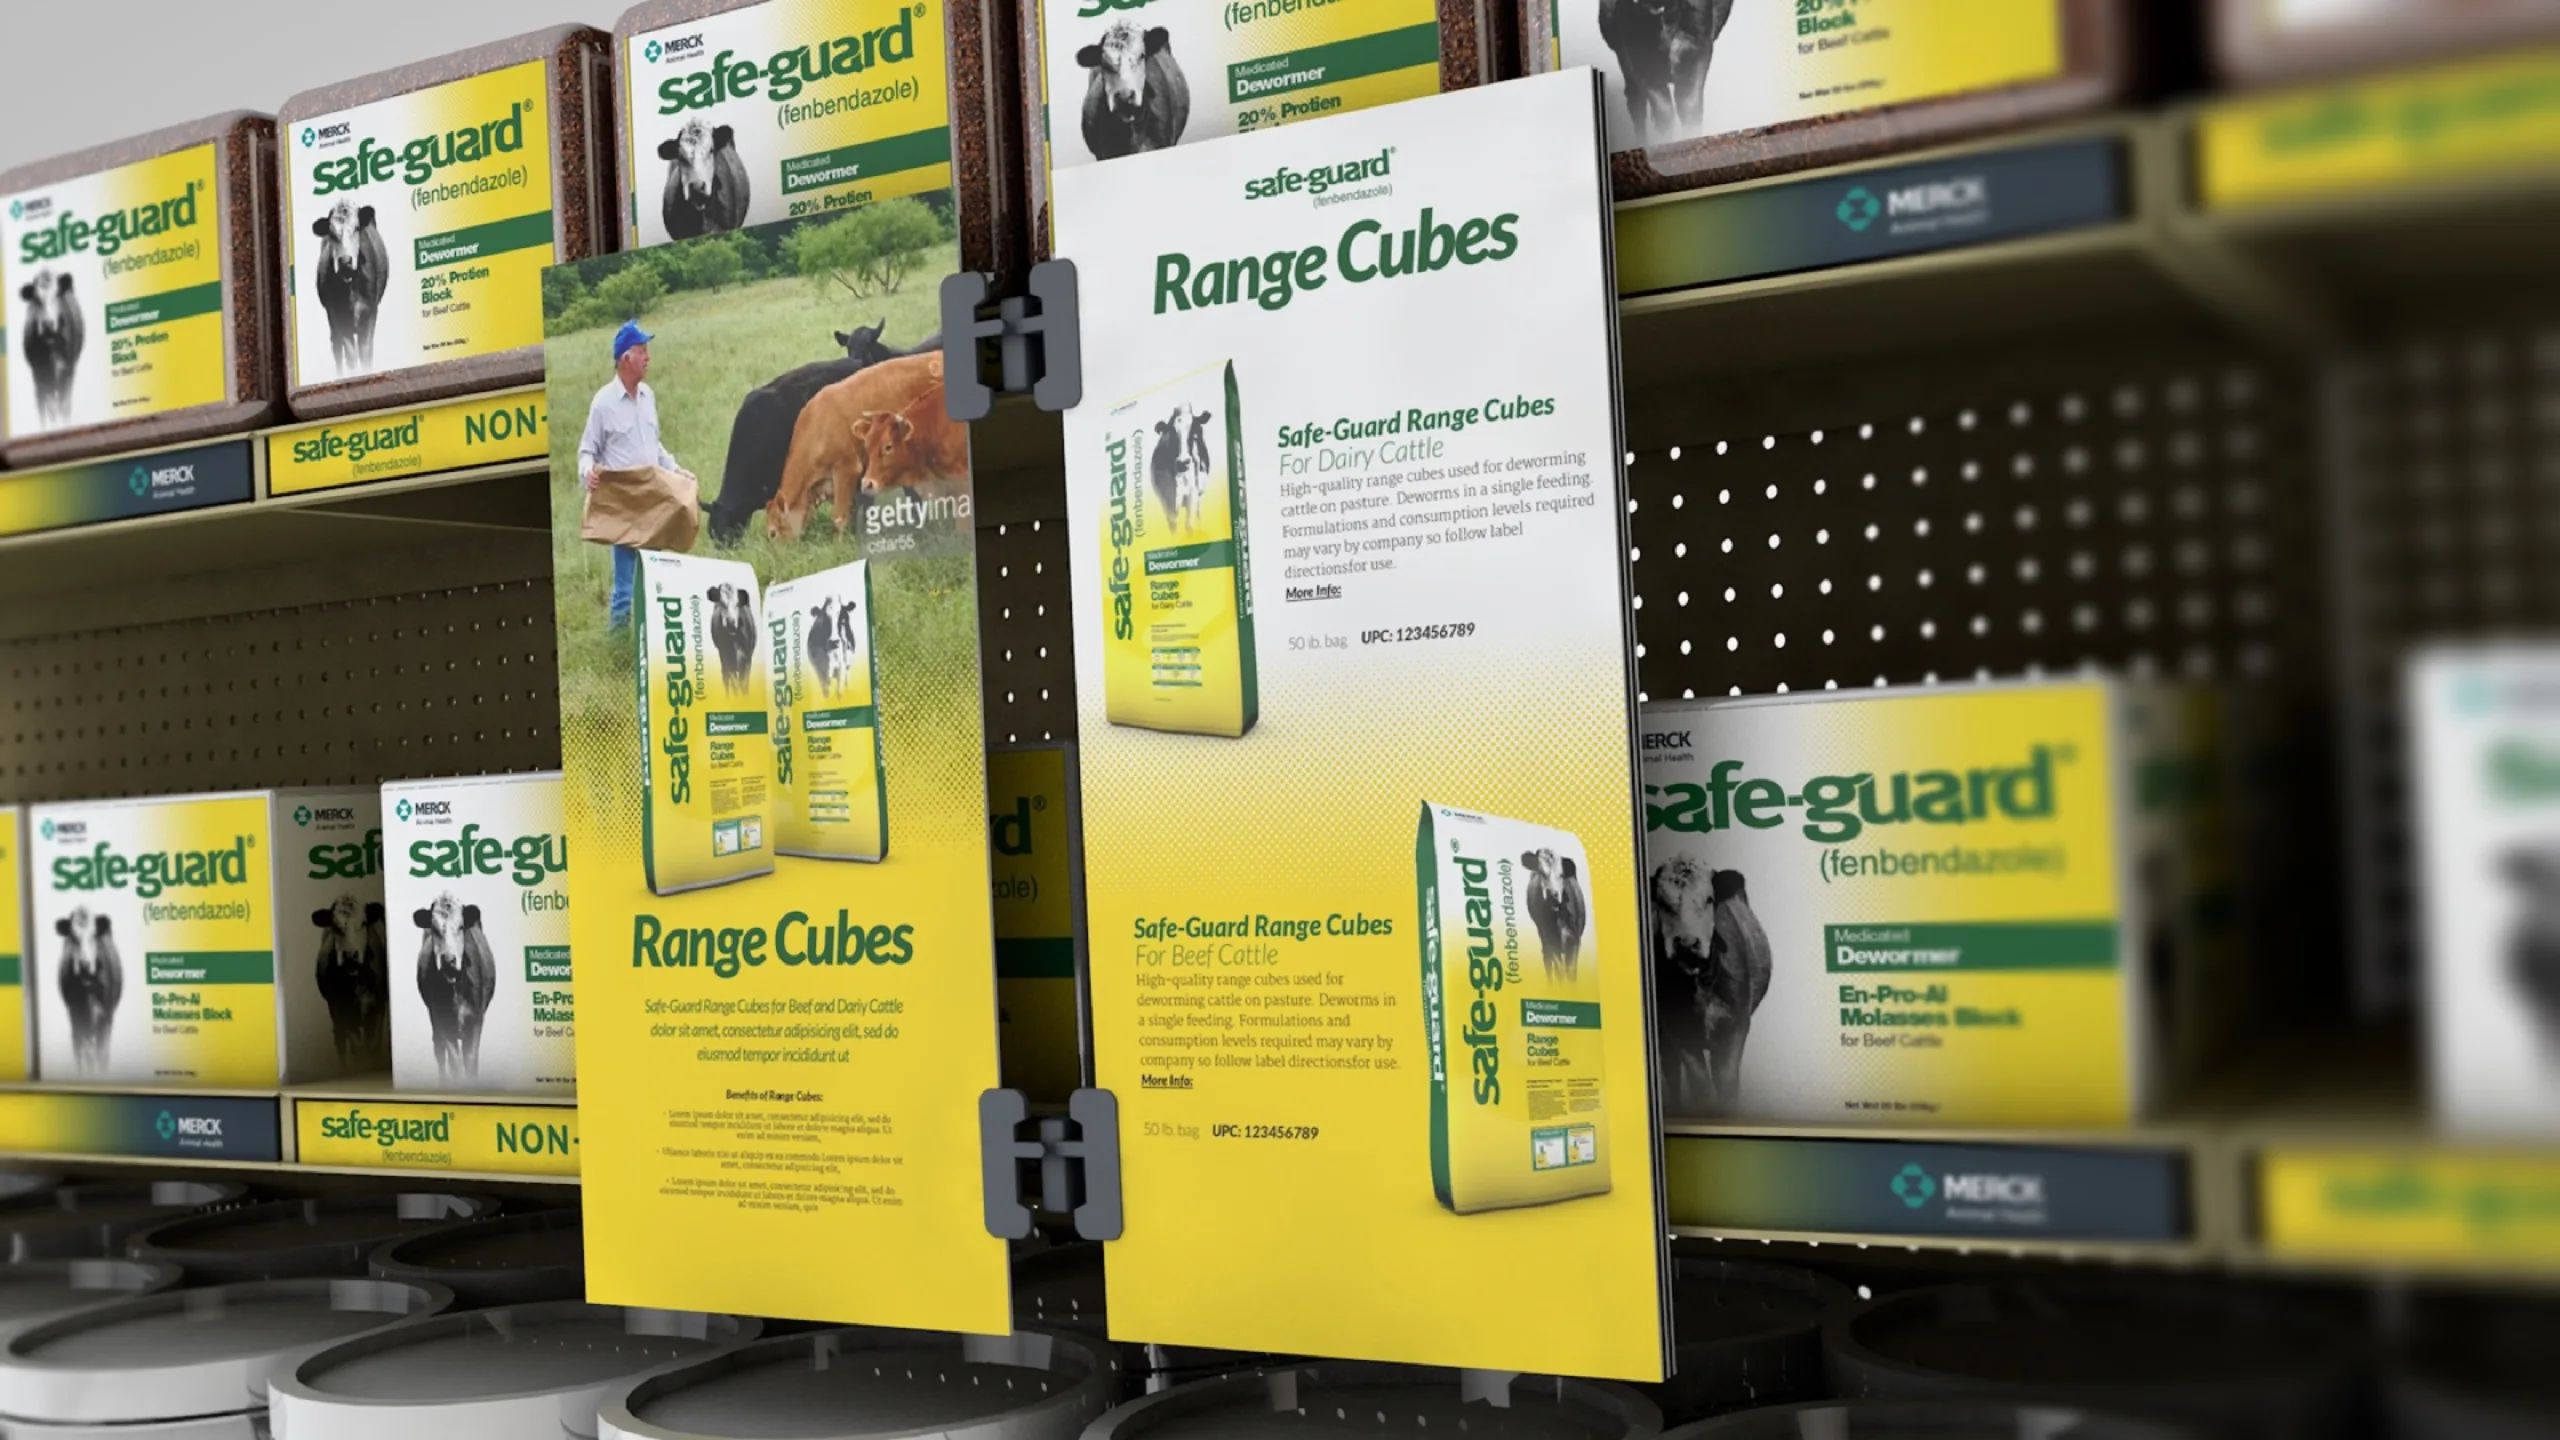 safe-guard cattle display